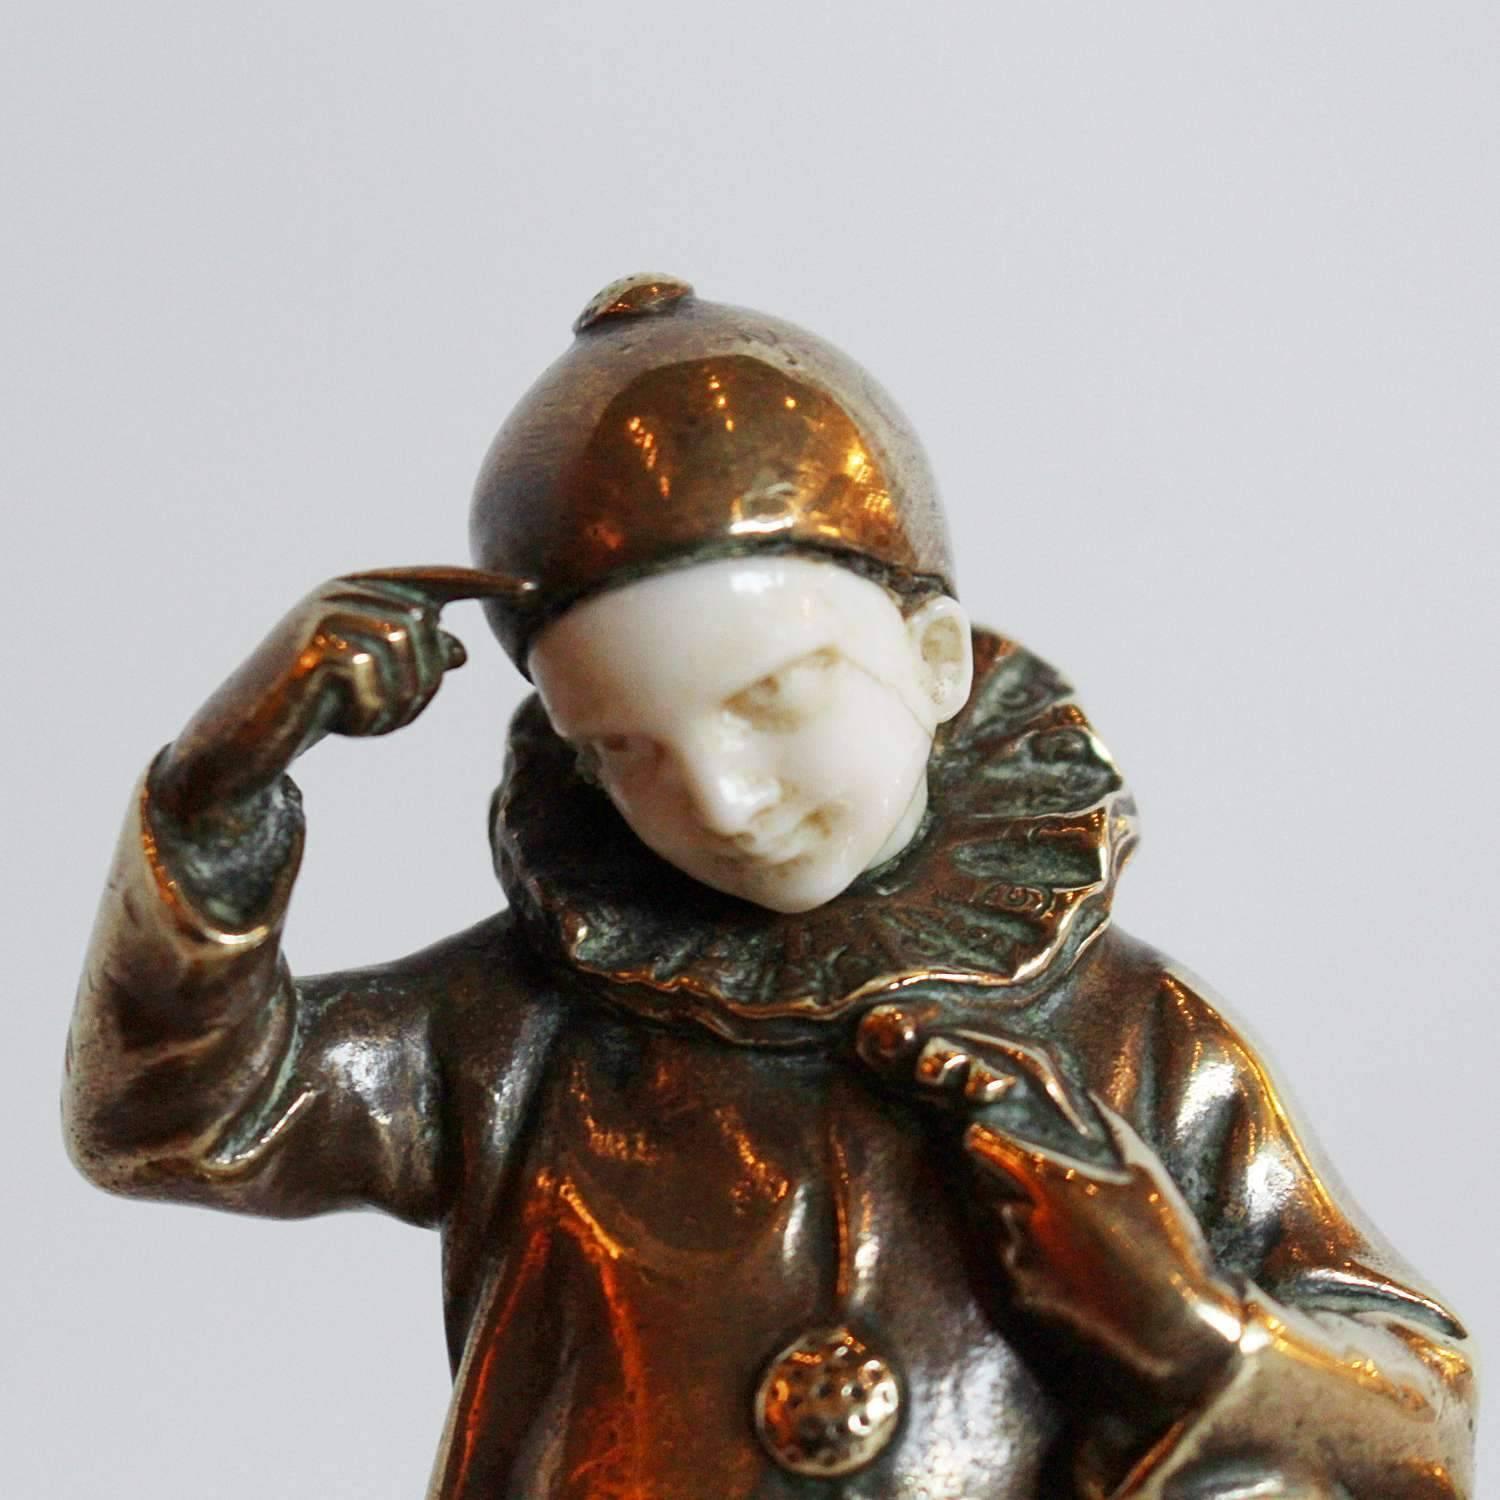 An early 20th century bronze, crystal and ivory pen and ink stand. Base with two integral inkwells, set with a bronze and ivory figure of a Pierrot holding a musical instrument. Signed P Tereszczuk to bronze.

Artist: Peter Tereszczuk